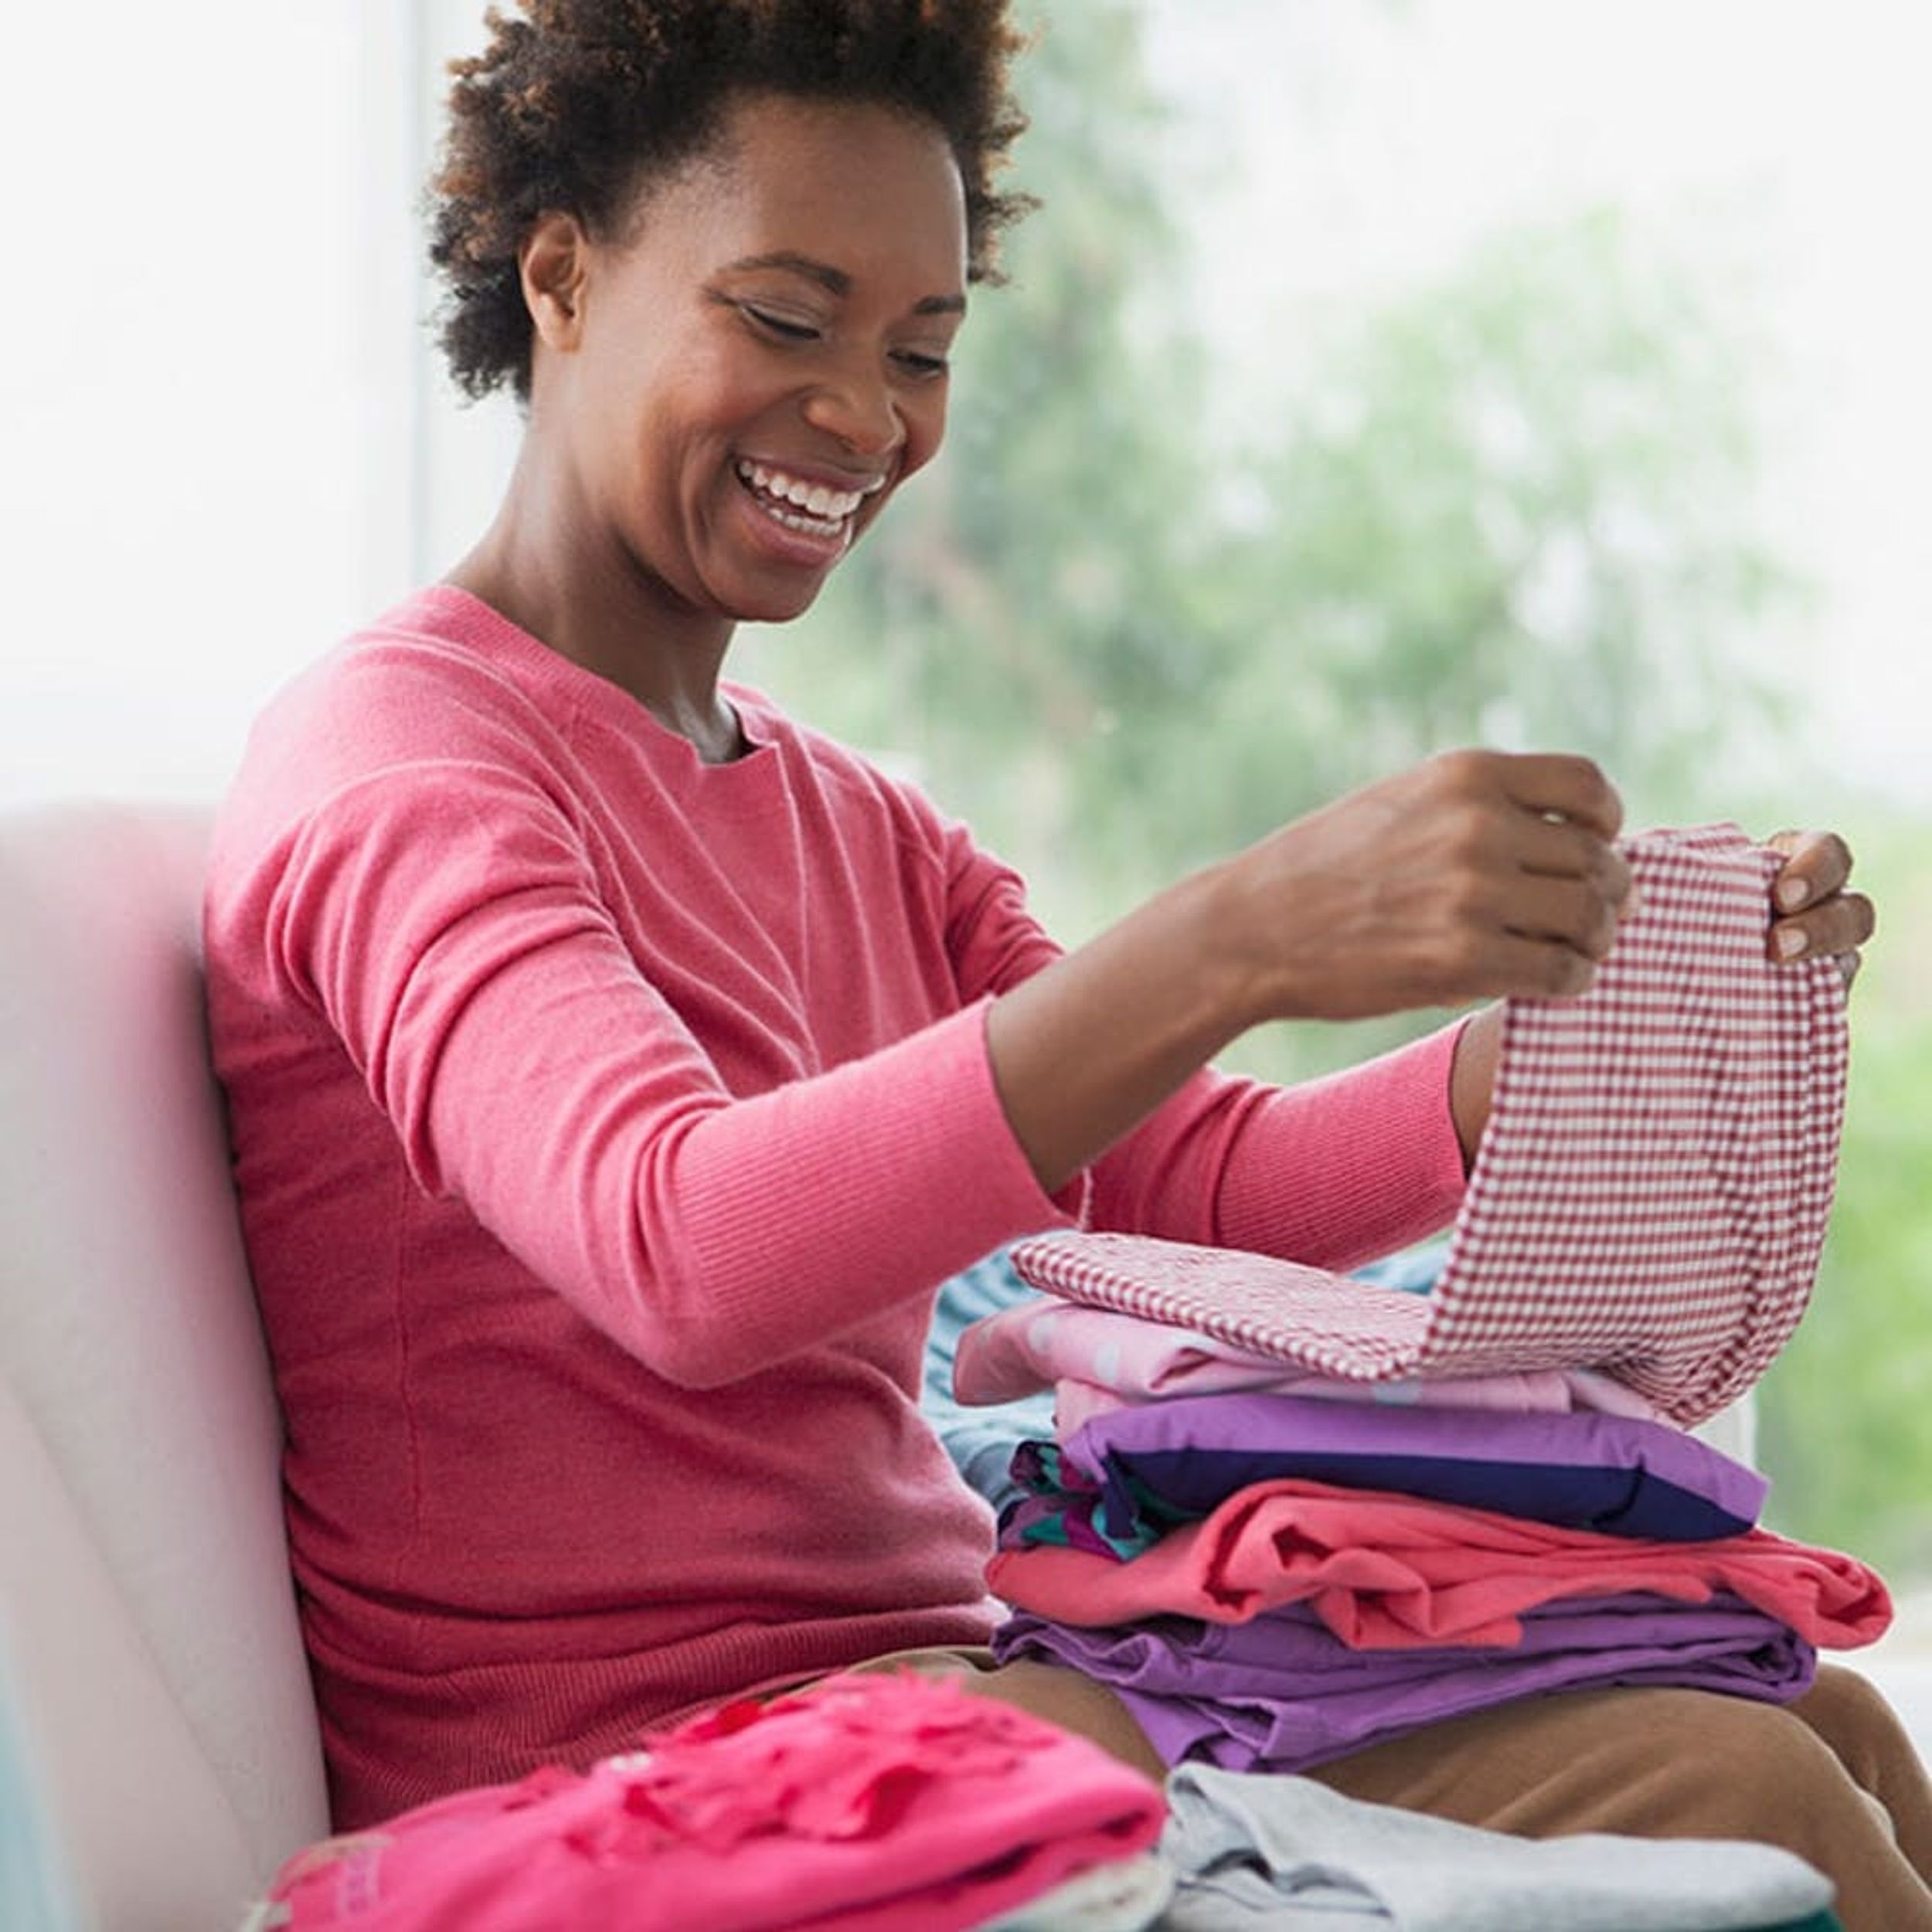 7 Essential Hacks for Making Laundry a Breeze When You’re Traveling